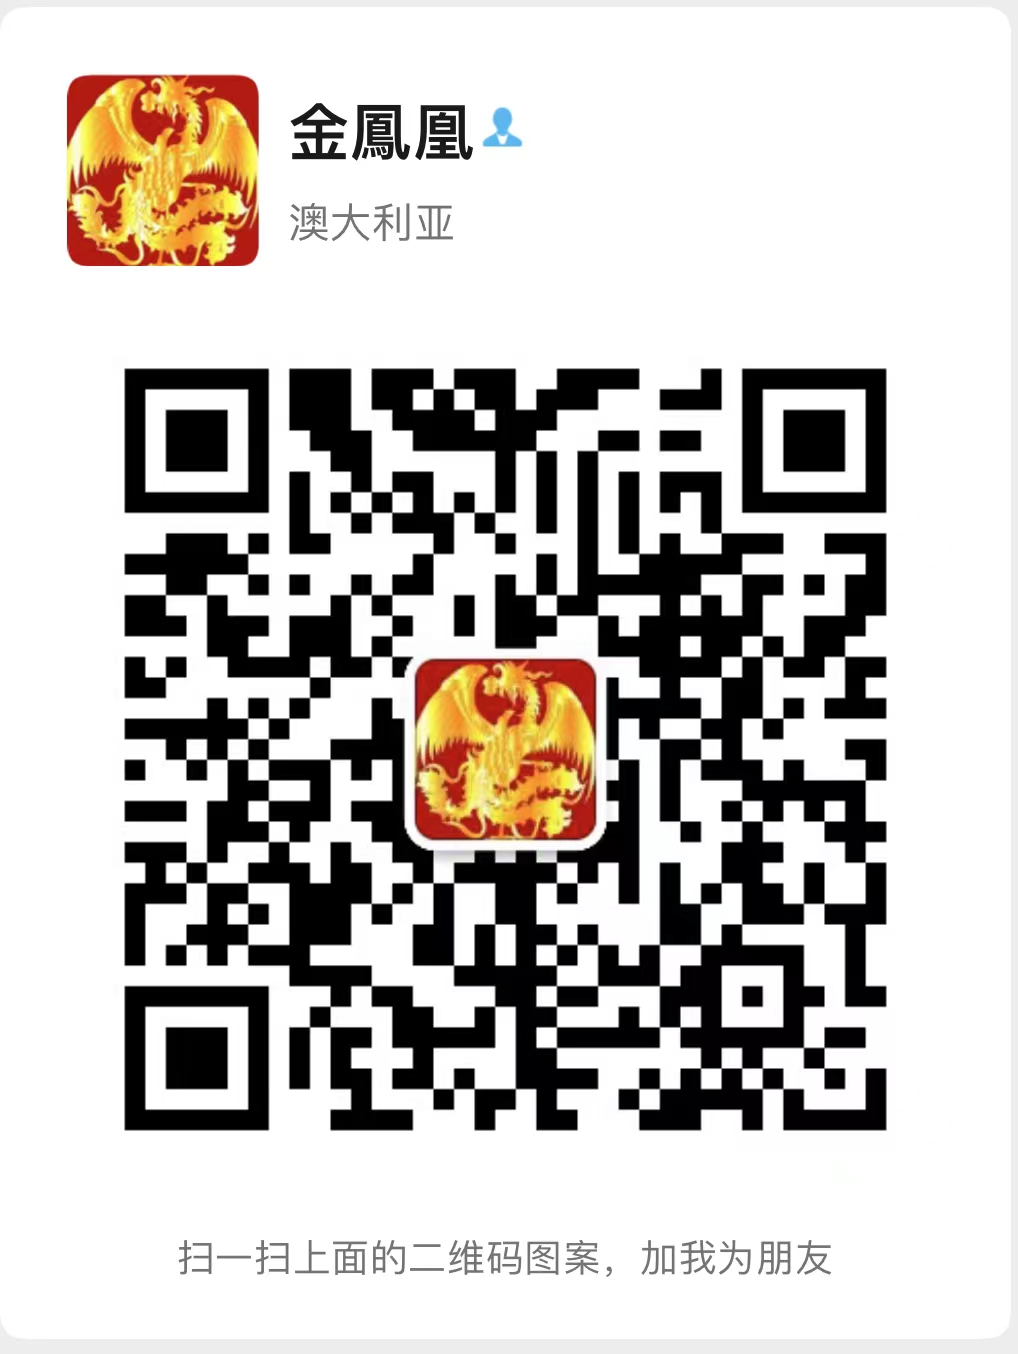 wechat code 1 for live chat 金凤凰二维码